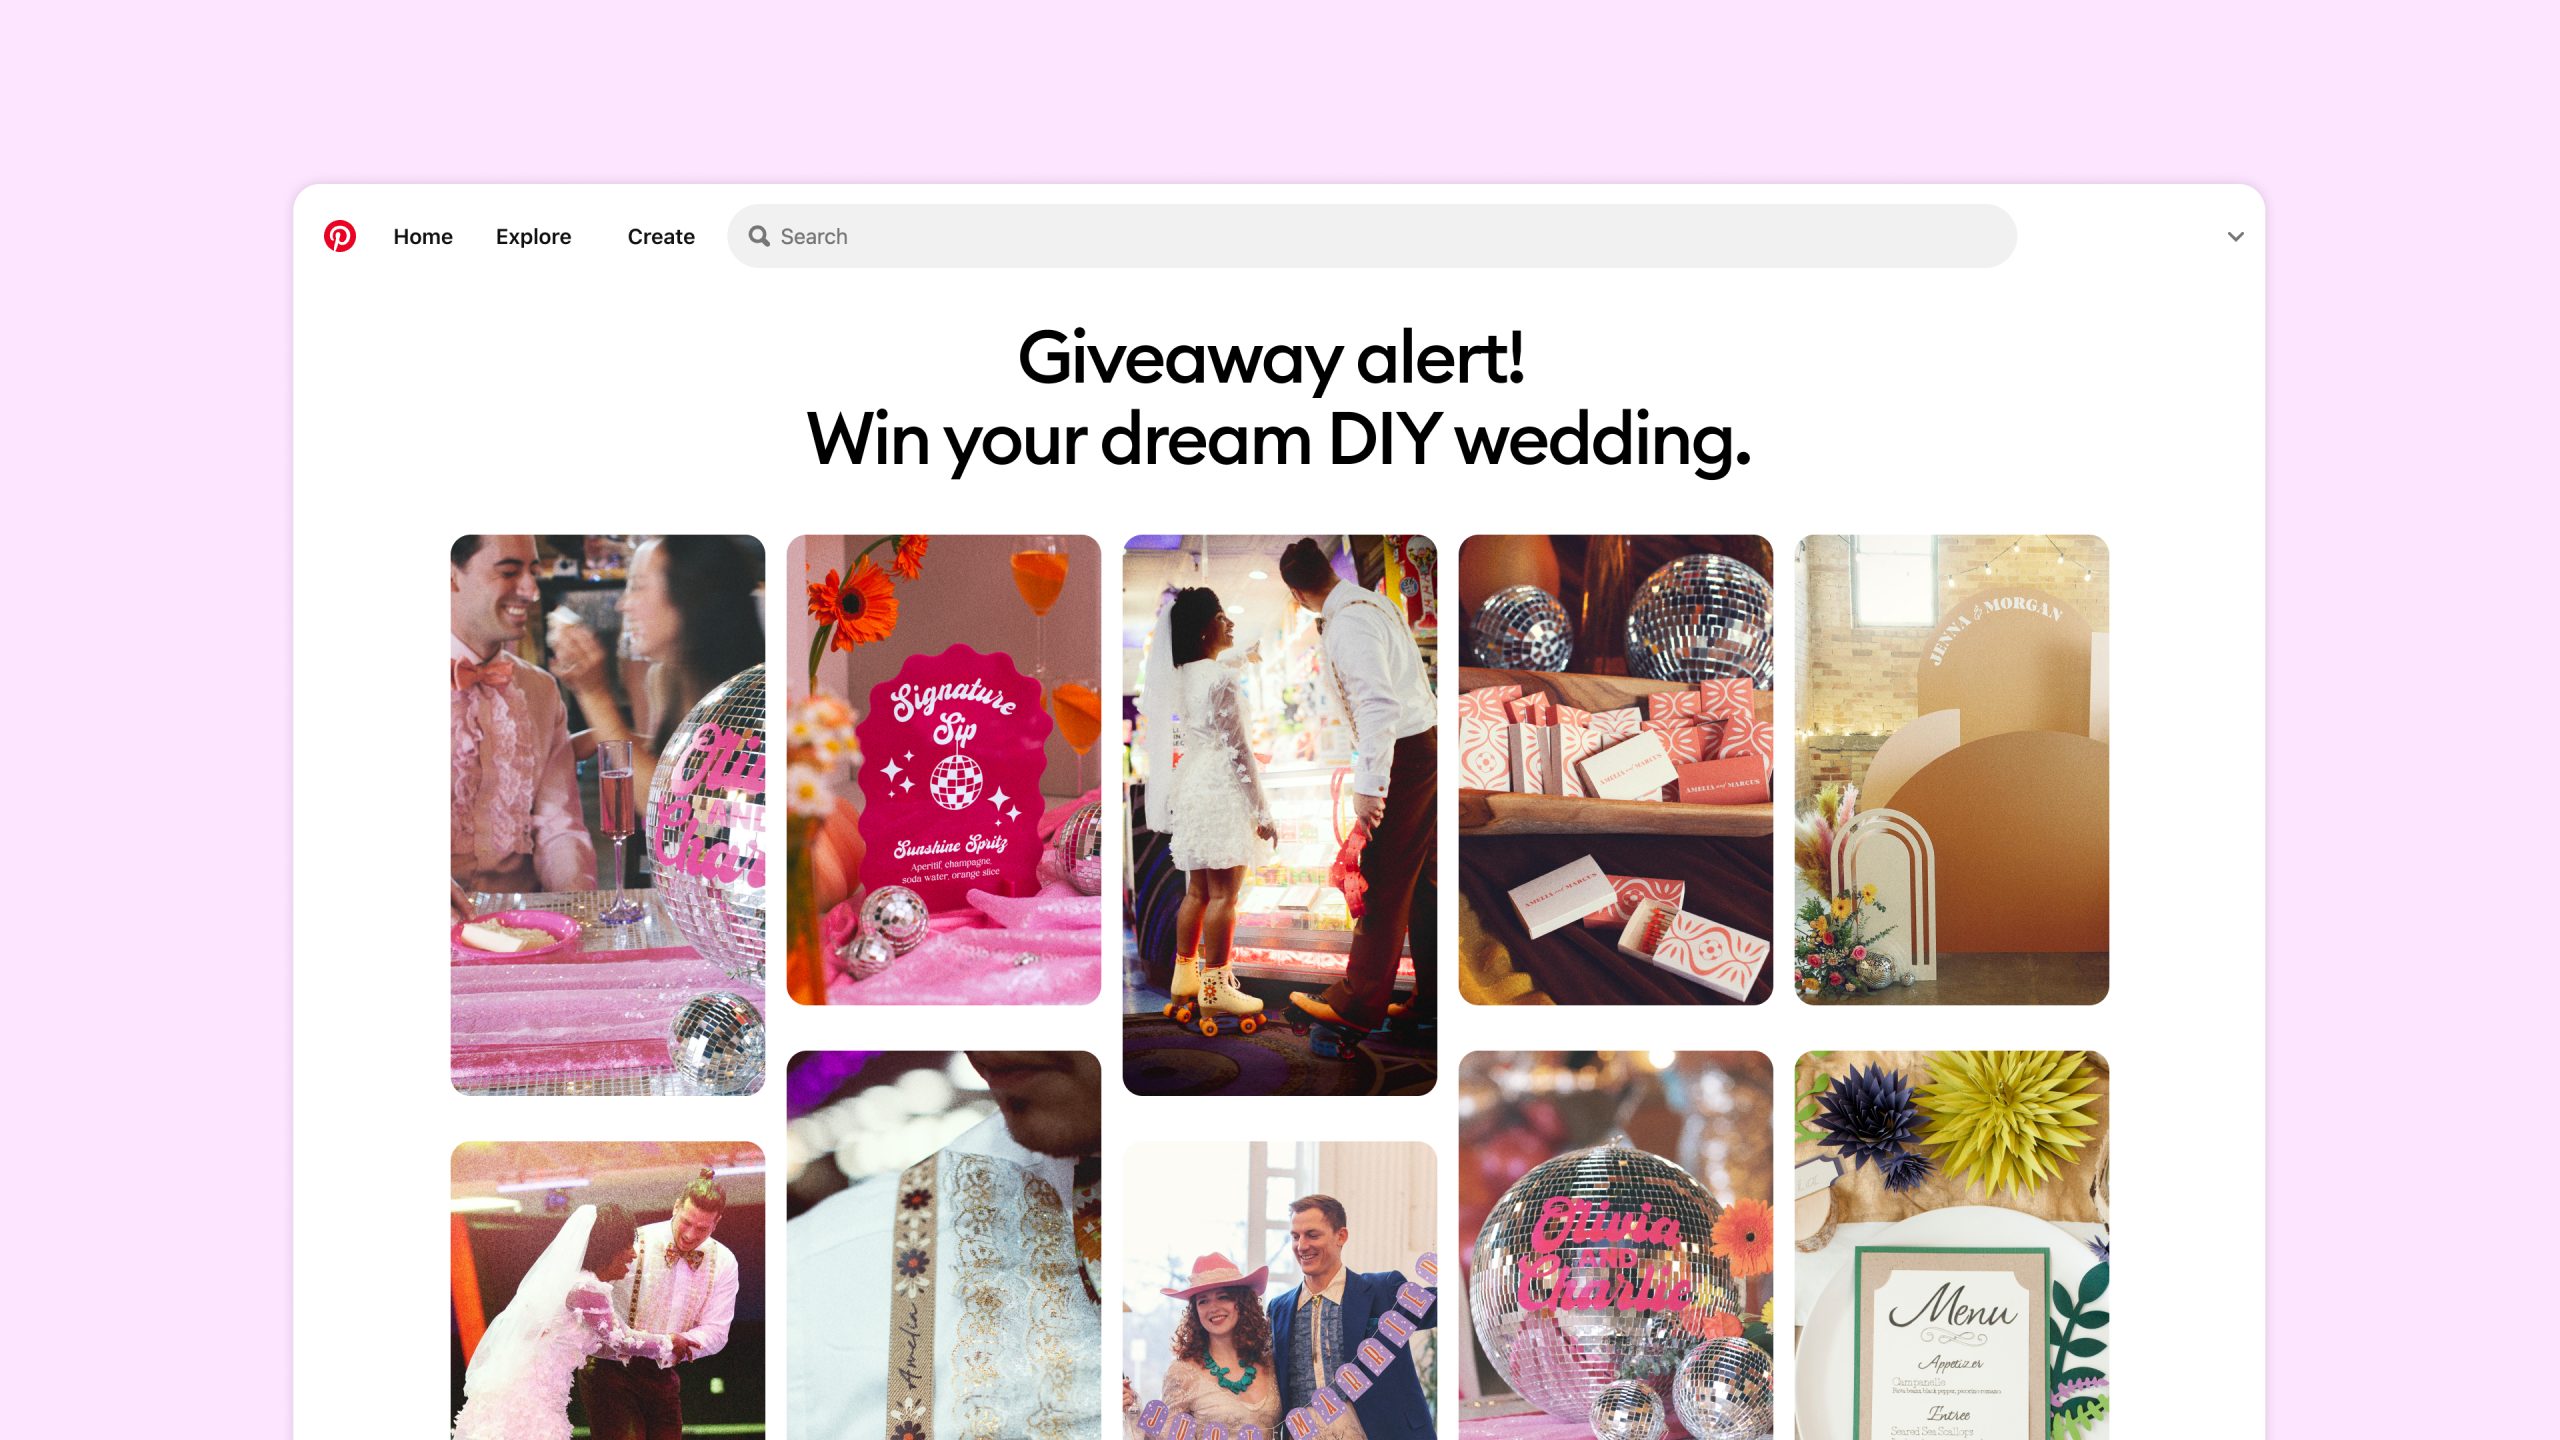 Pin to Win your dream DIY wedding with Cricut giveaway